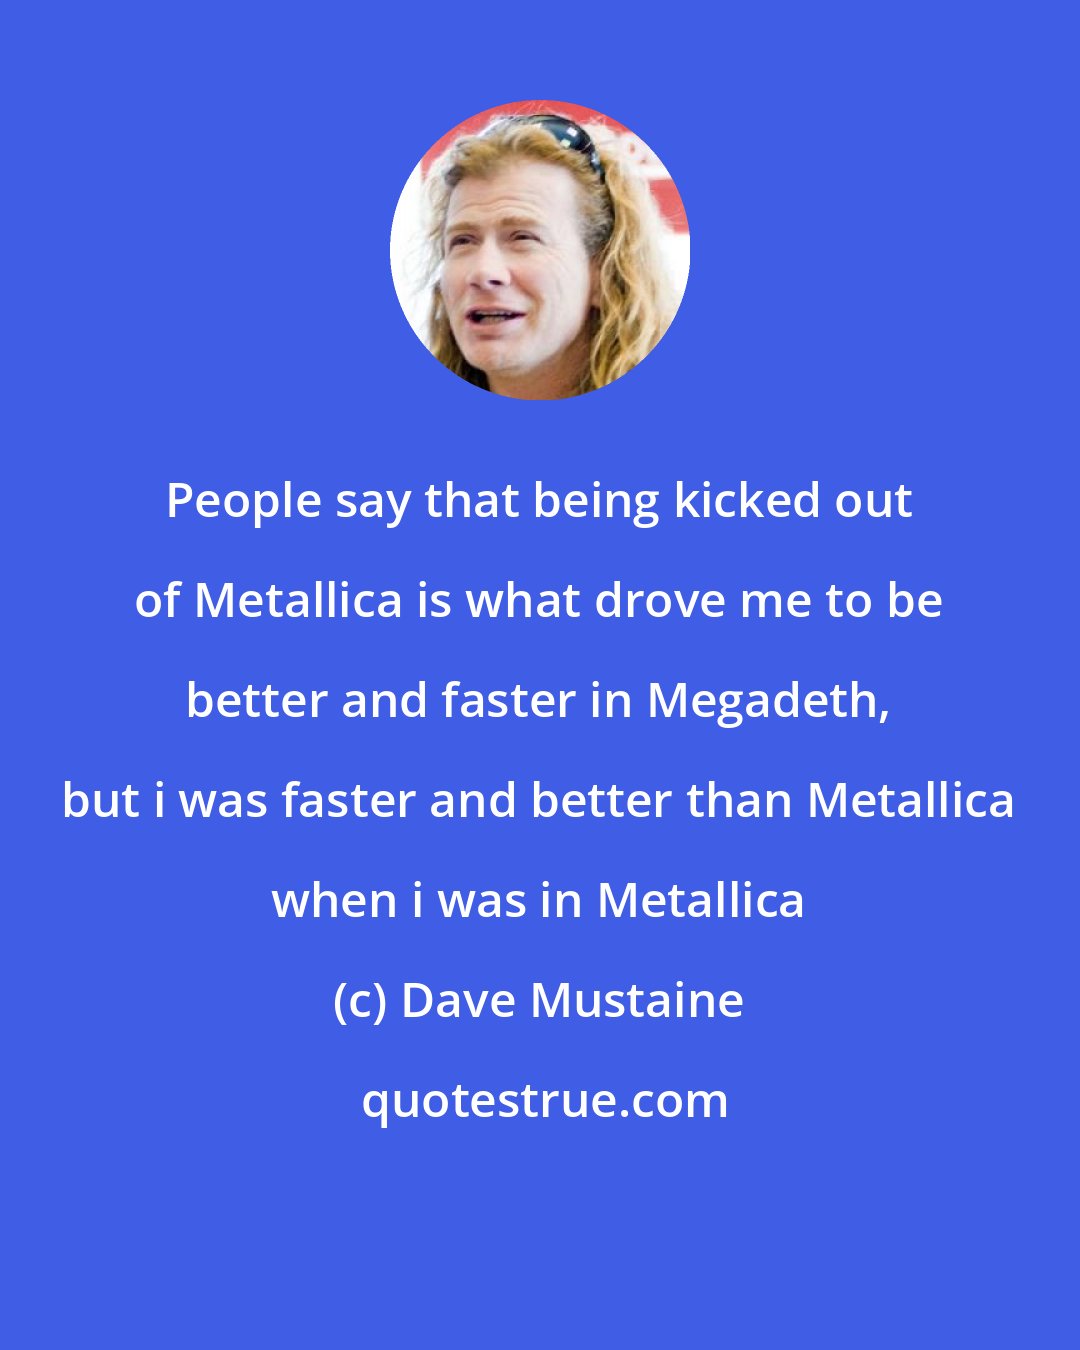 Dave Mustaine: People say that being kicked out of Metallica is what drove me to be better and faster in Megadeth, but i was faster and better than Metallica when i was in Metallica